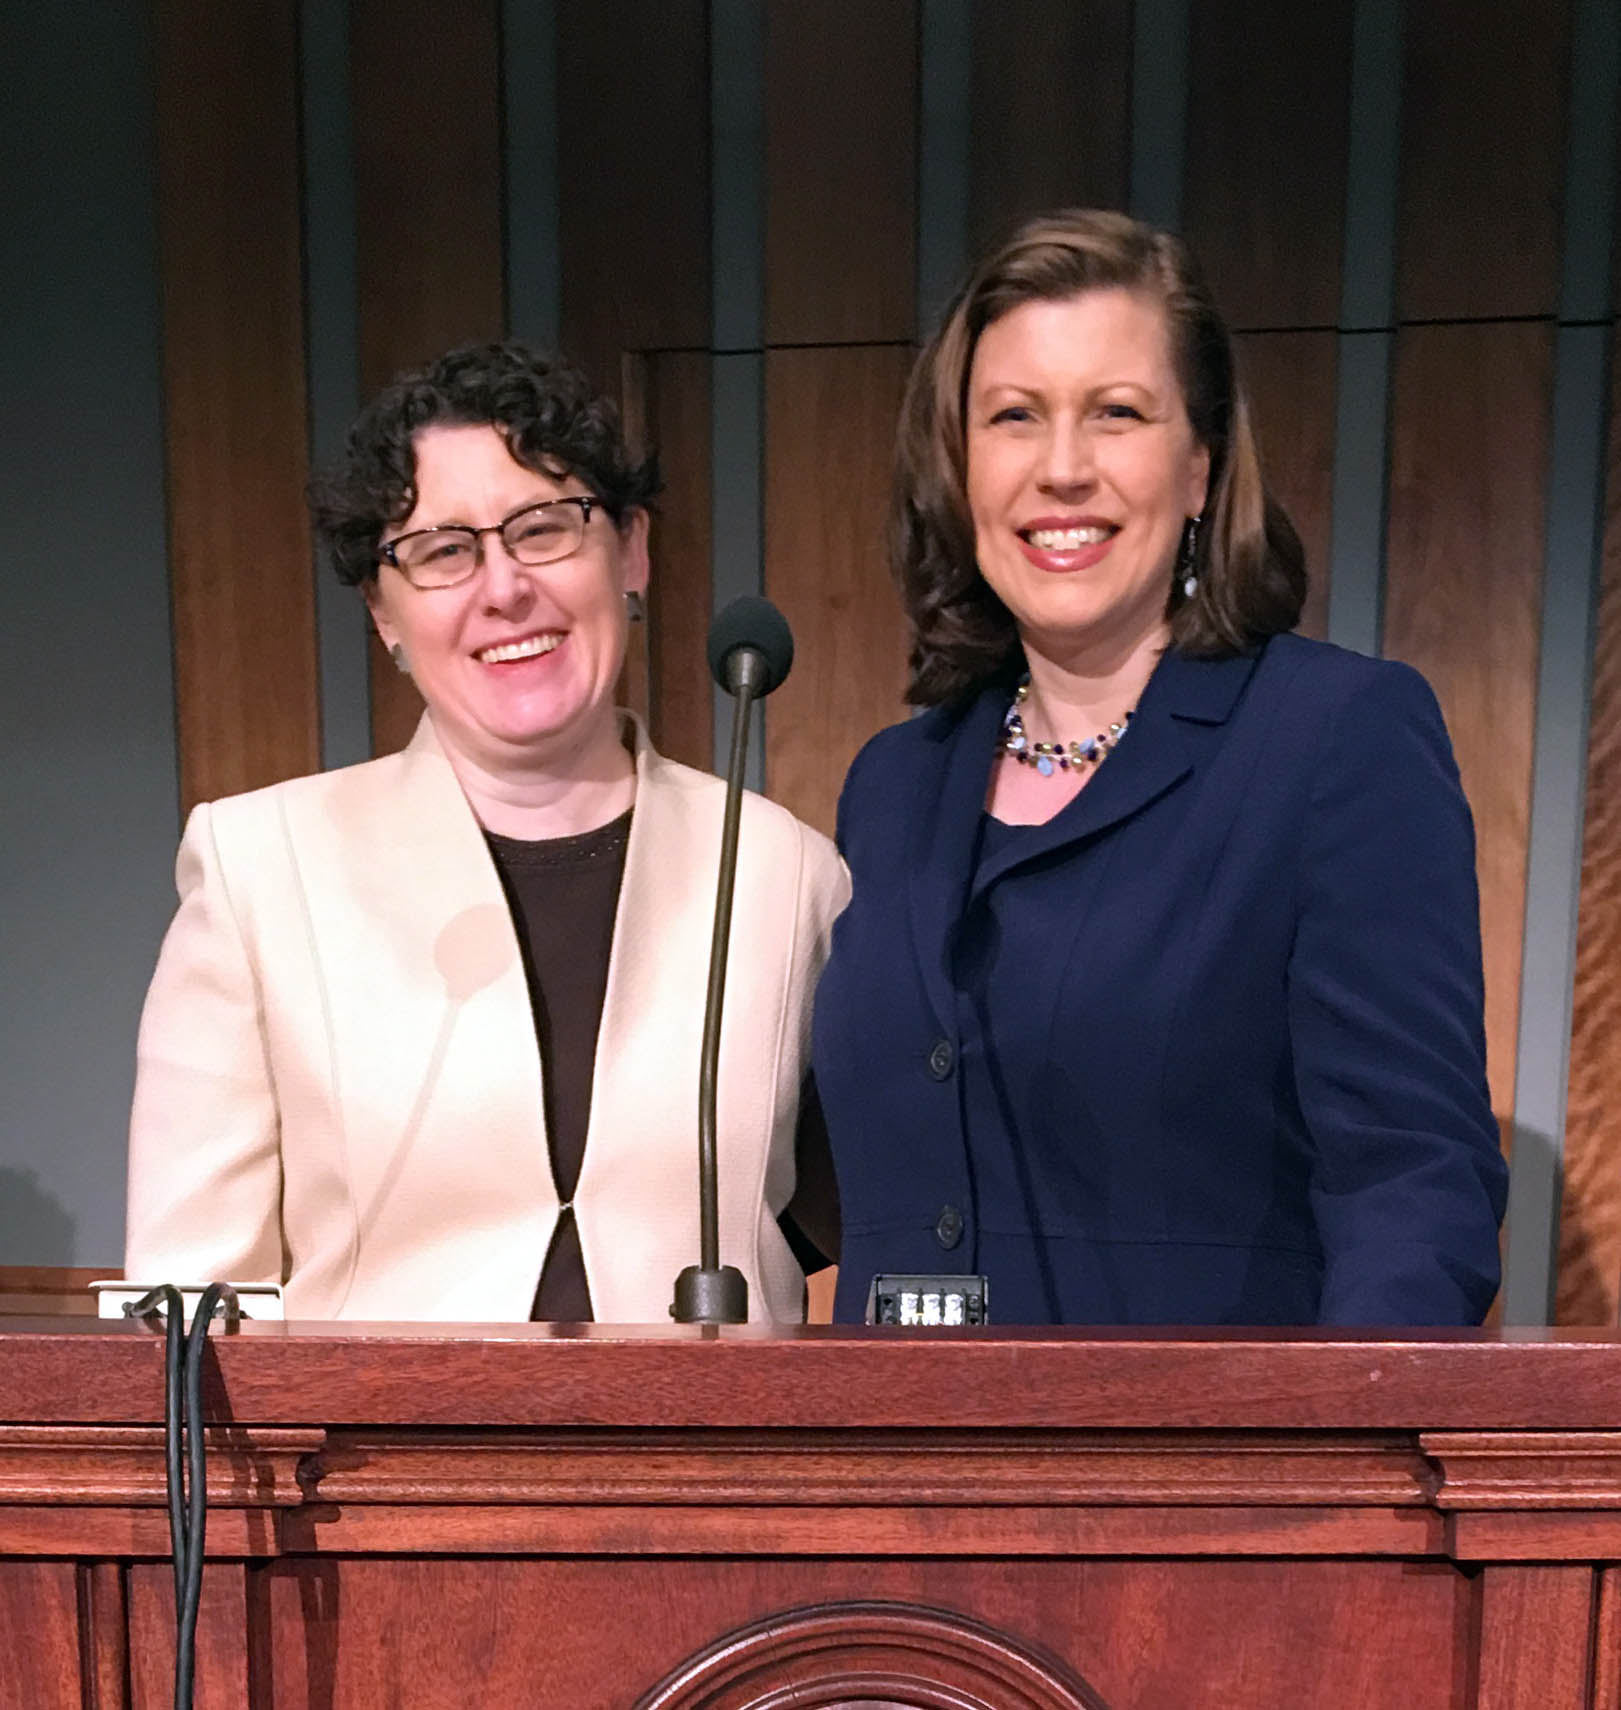 Image for Elizabeth Clark and Hannah Clayson Smith speak at BYU Women's Conference, May 2018